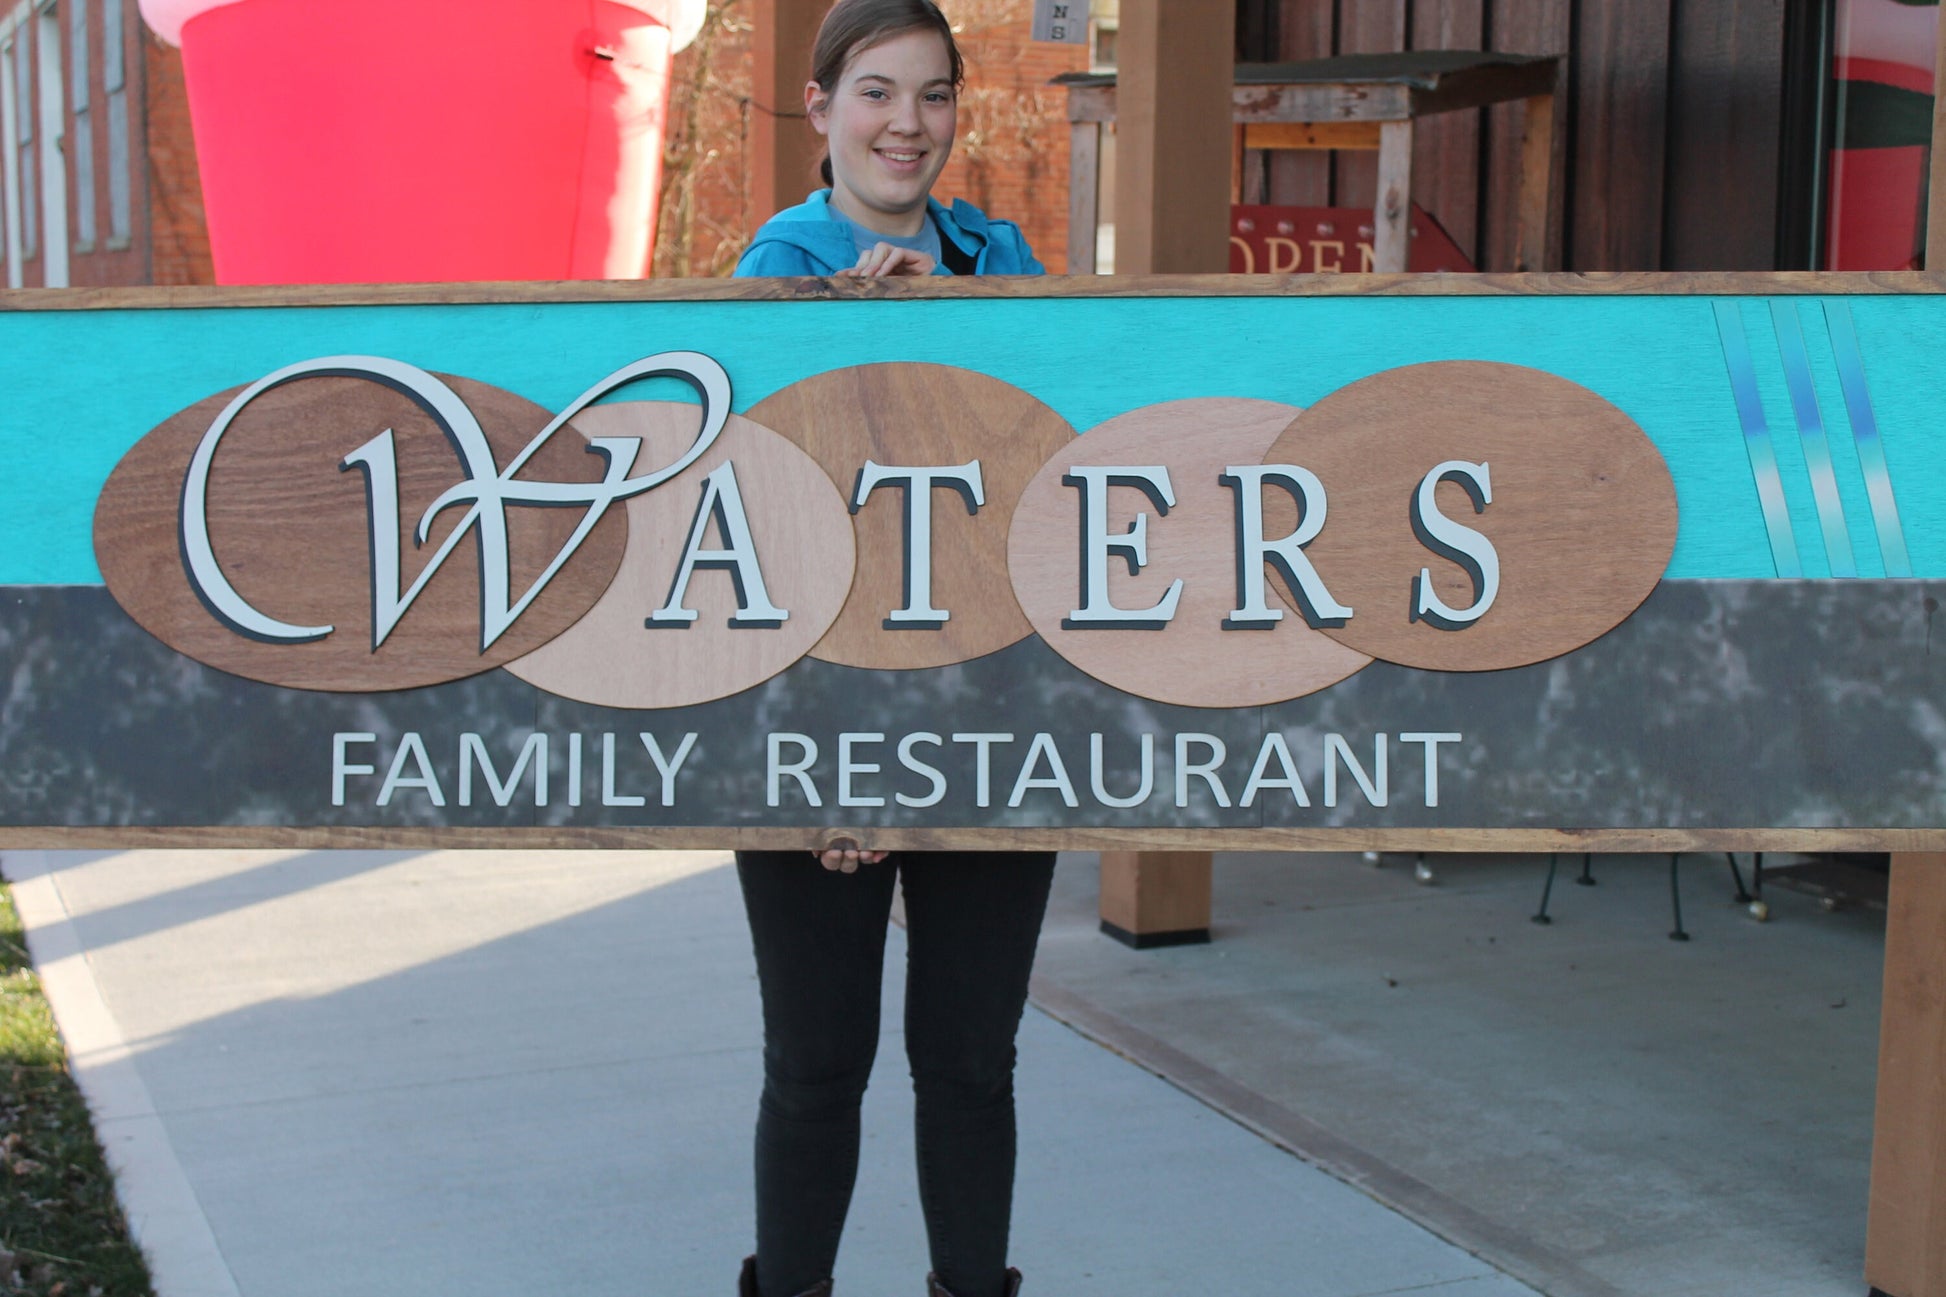 Custom Oversized Family Restaurant Waters Brown Blue Logo Printed and Raised Letters Handmade Wooden Signage Commerical Business